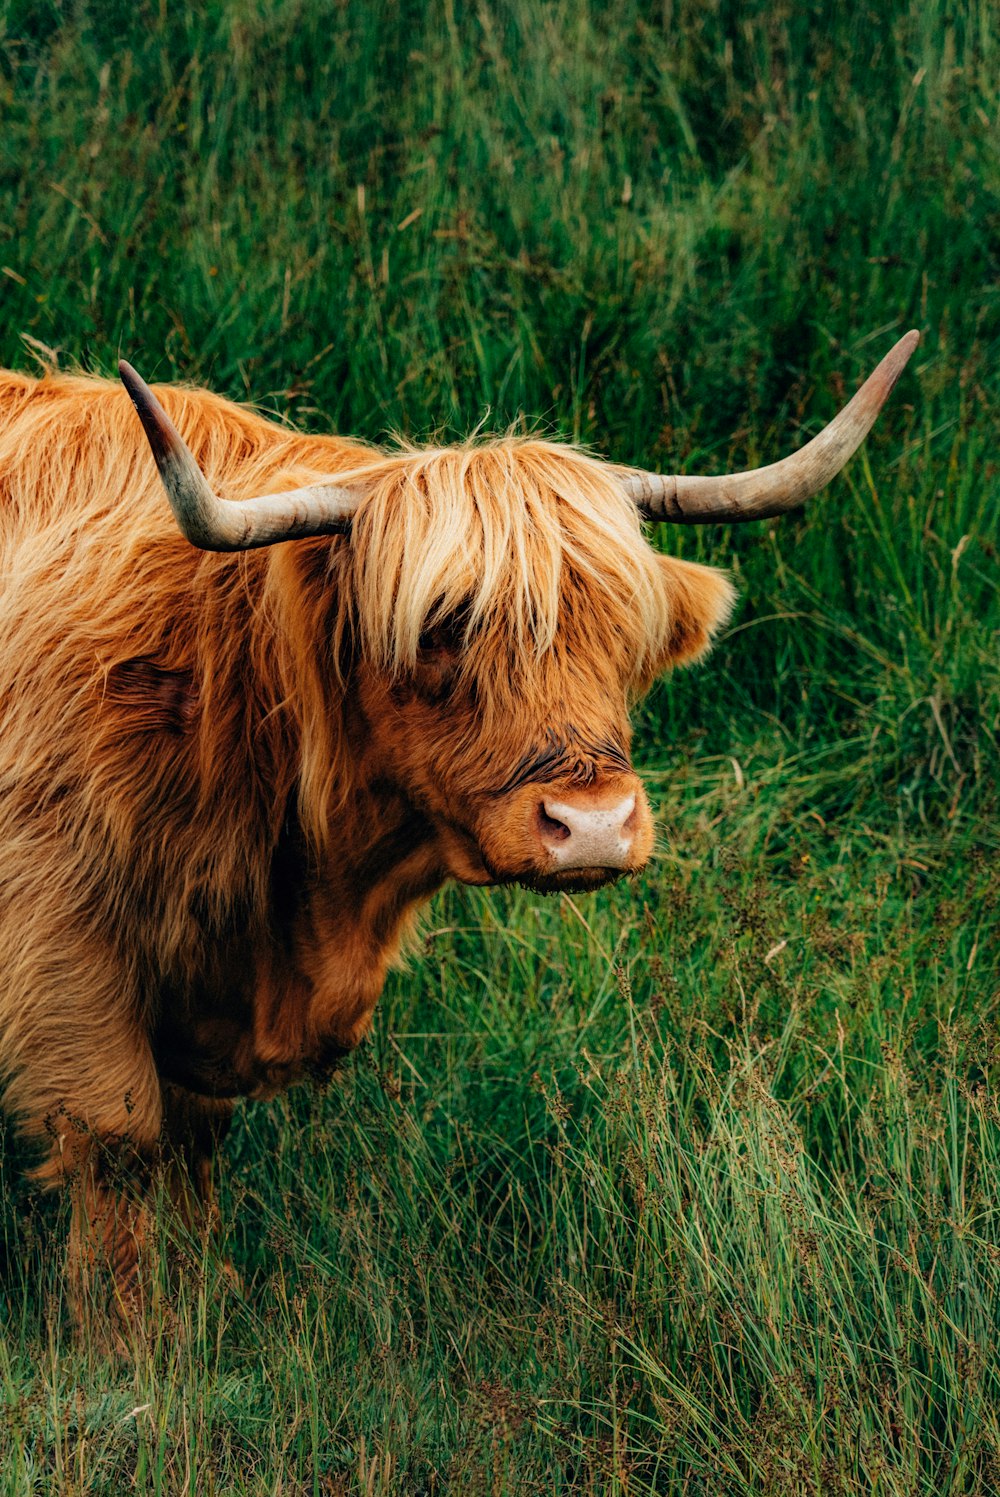 a shaggy cow with horns standing in a grassy field